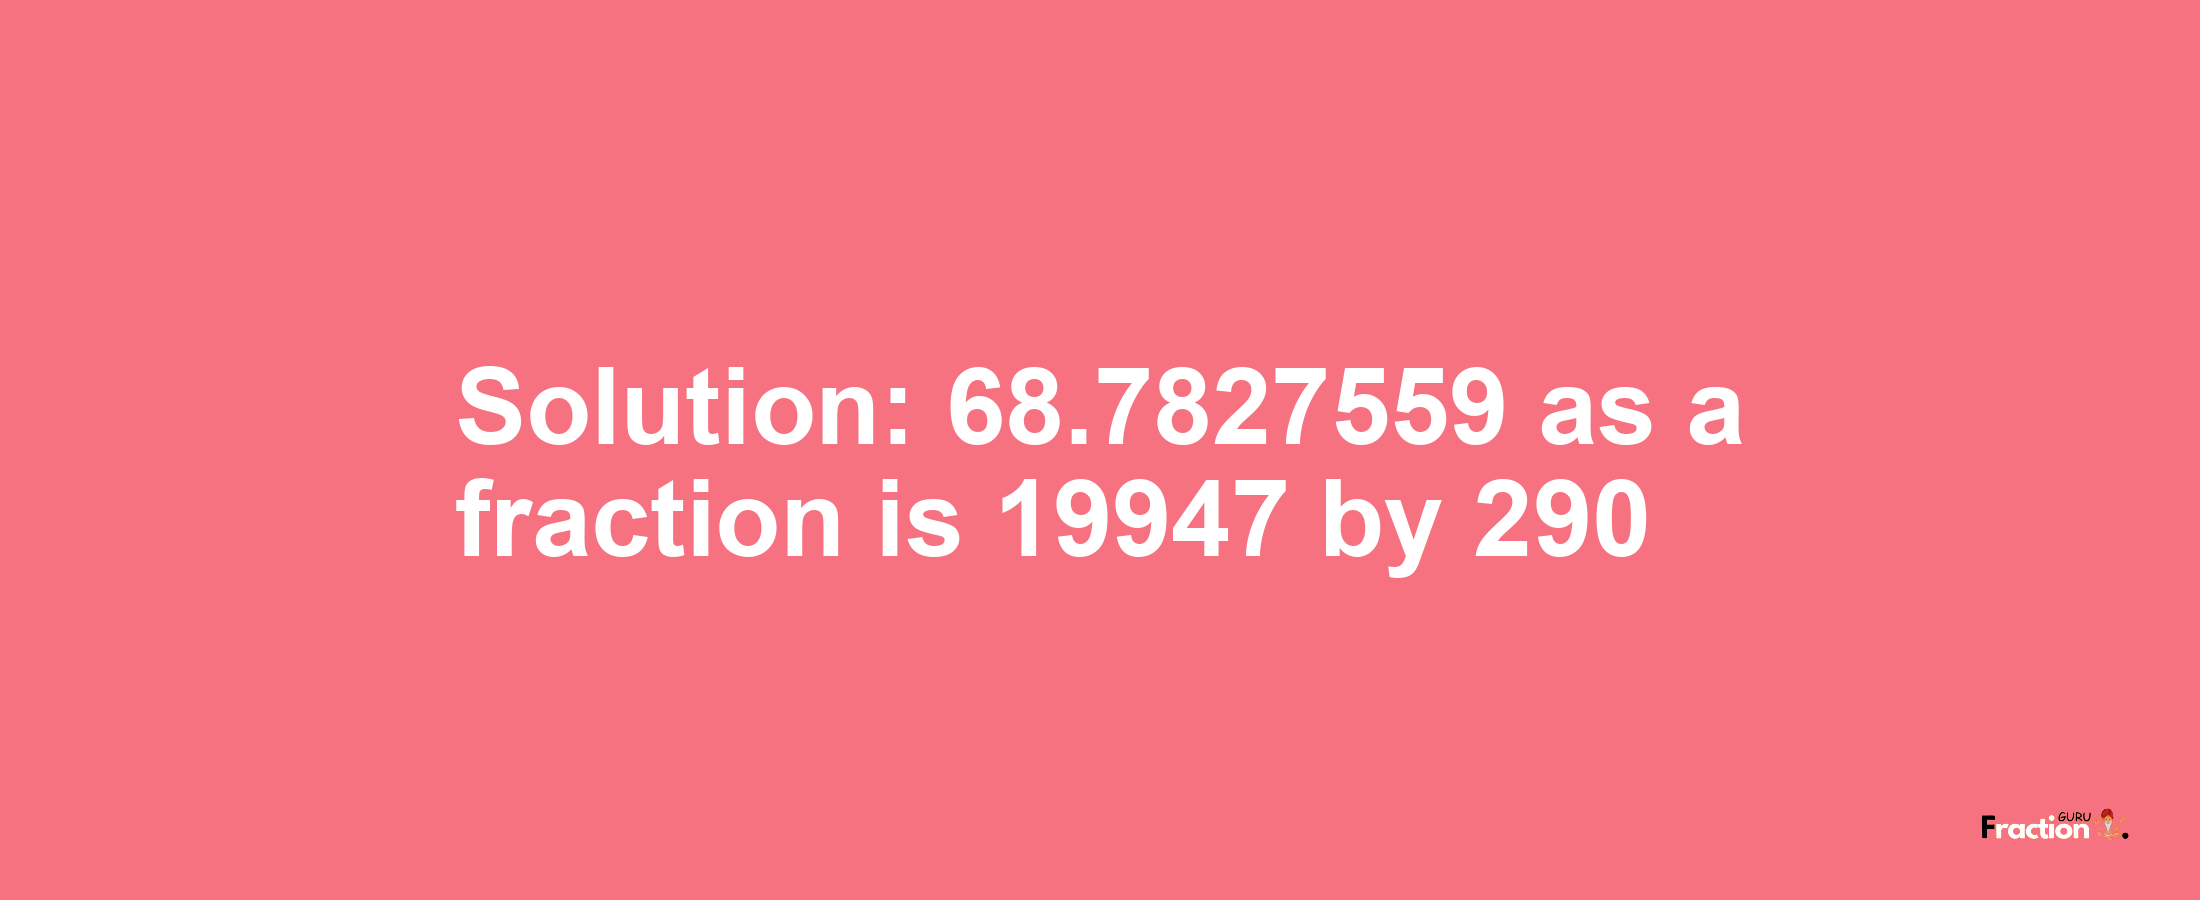 Solution:68.7827559 as a fraction is 19947/290